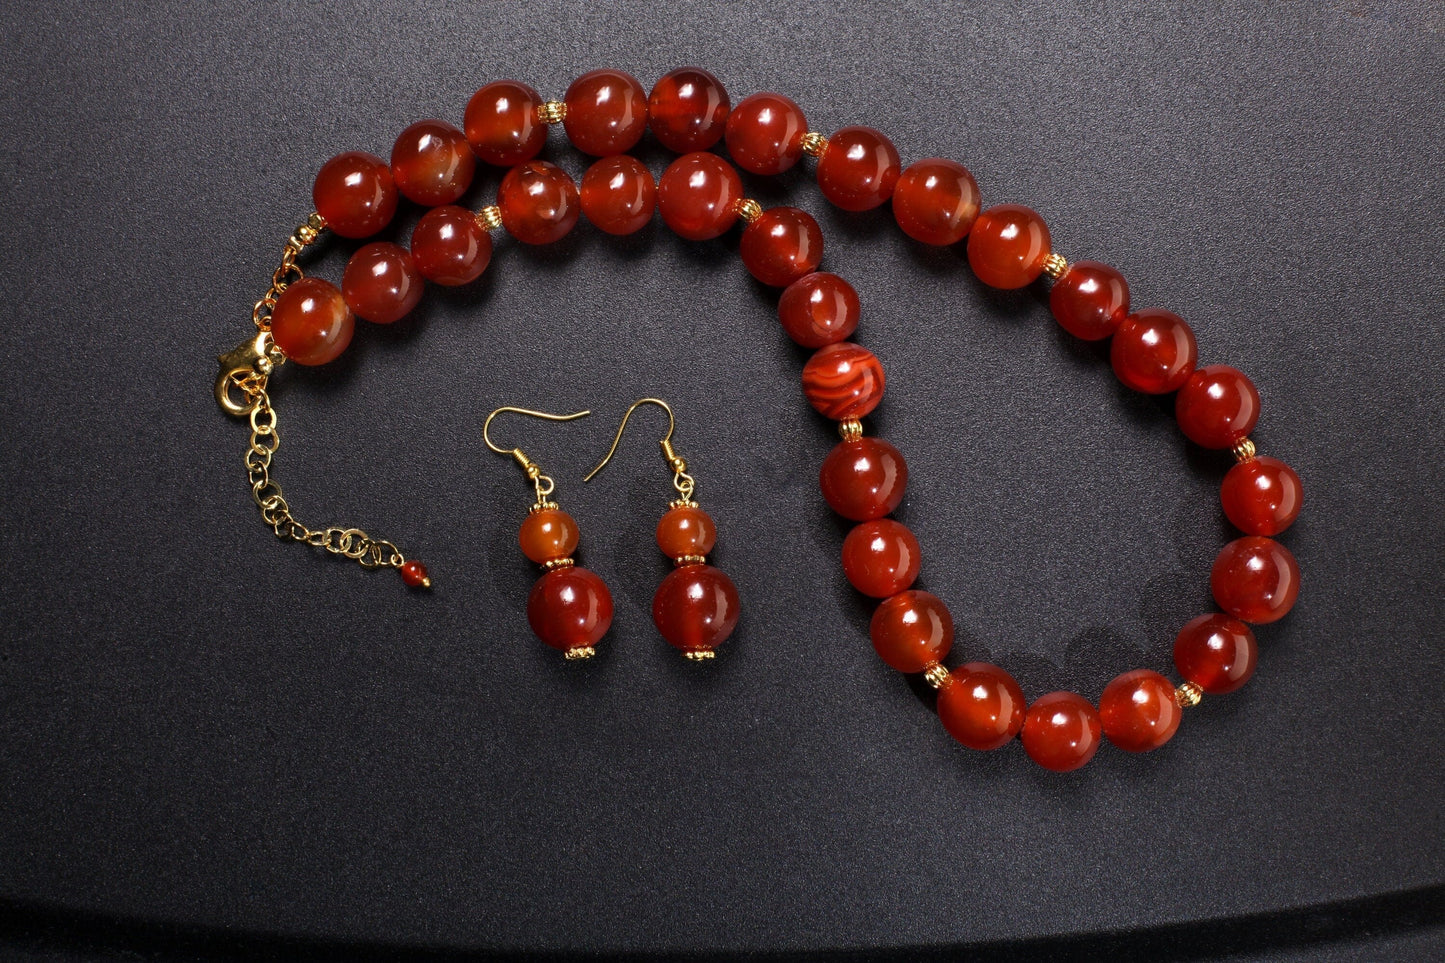 Natural Carnelian Agate Necklace Earrings Set, 14mm smooth Round with Matching Earrings Healing Gemstones